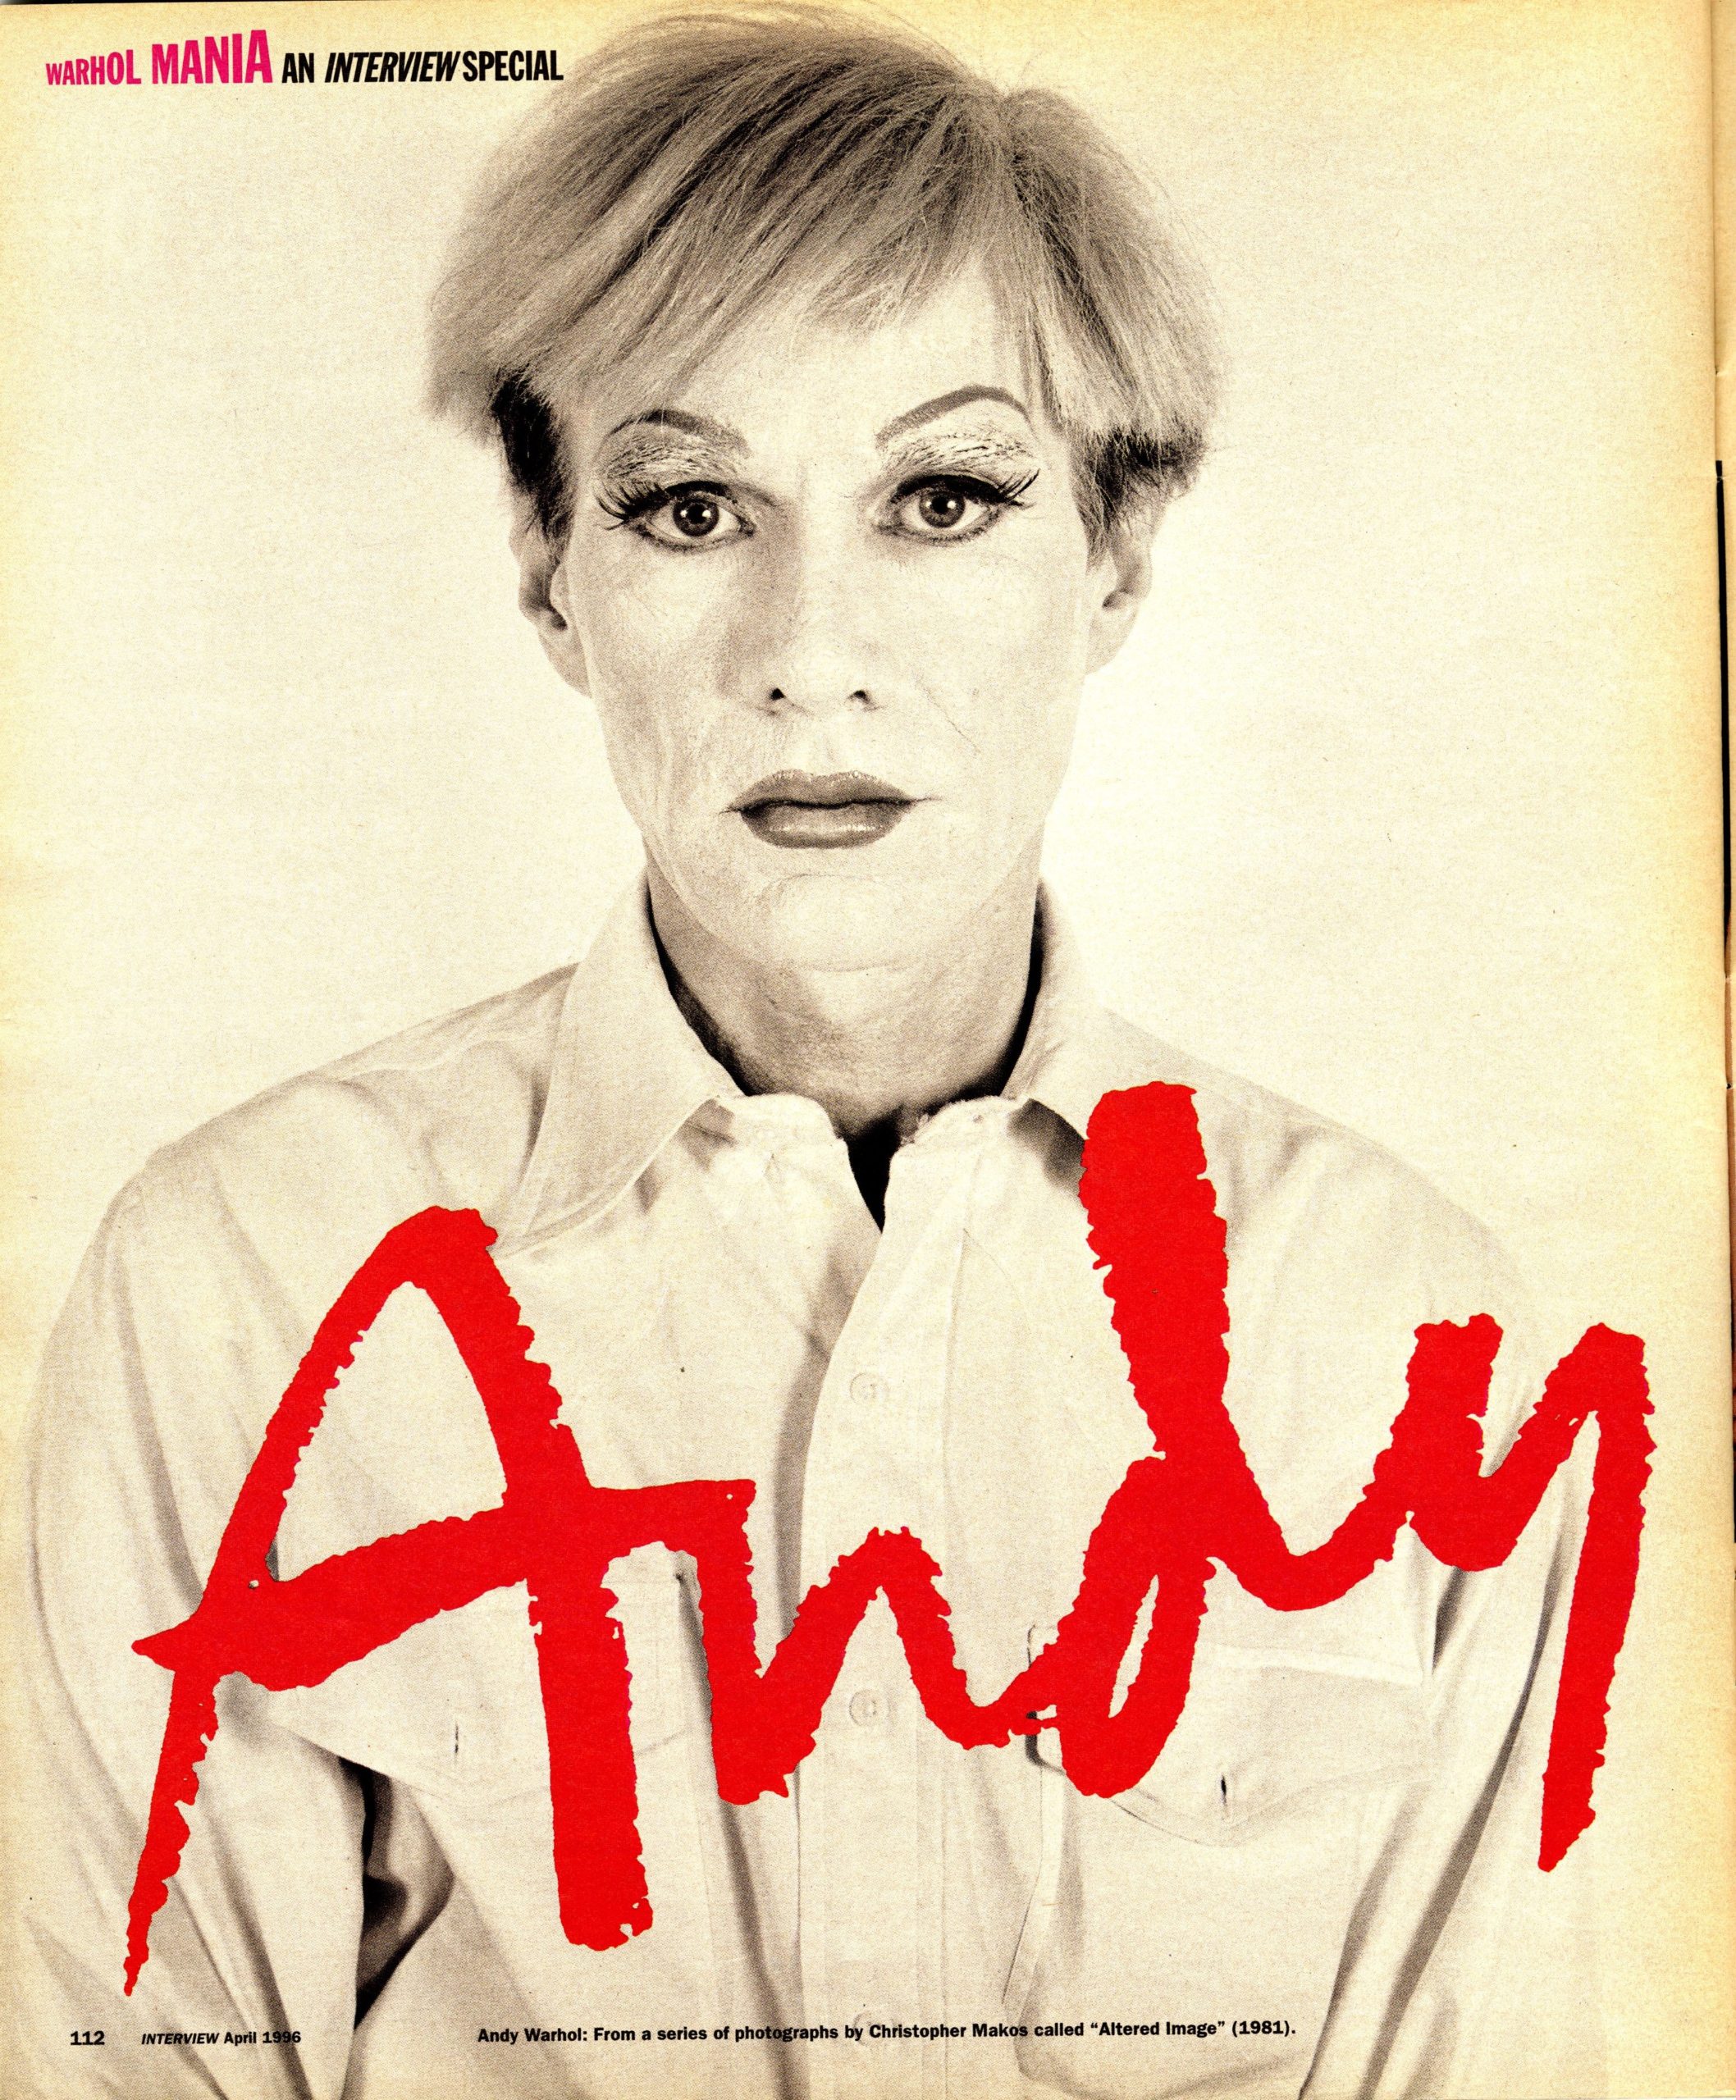 DRAGON: Life Lessons From the One and Only Andy Warhol